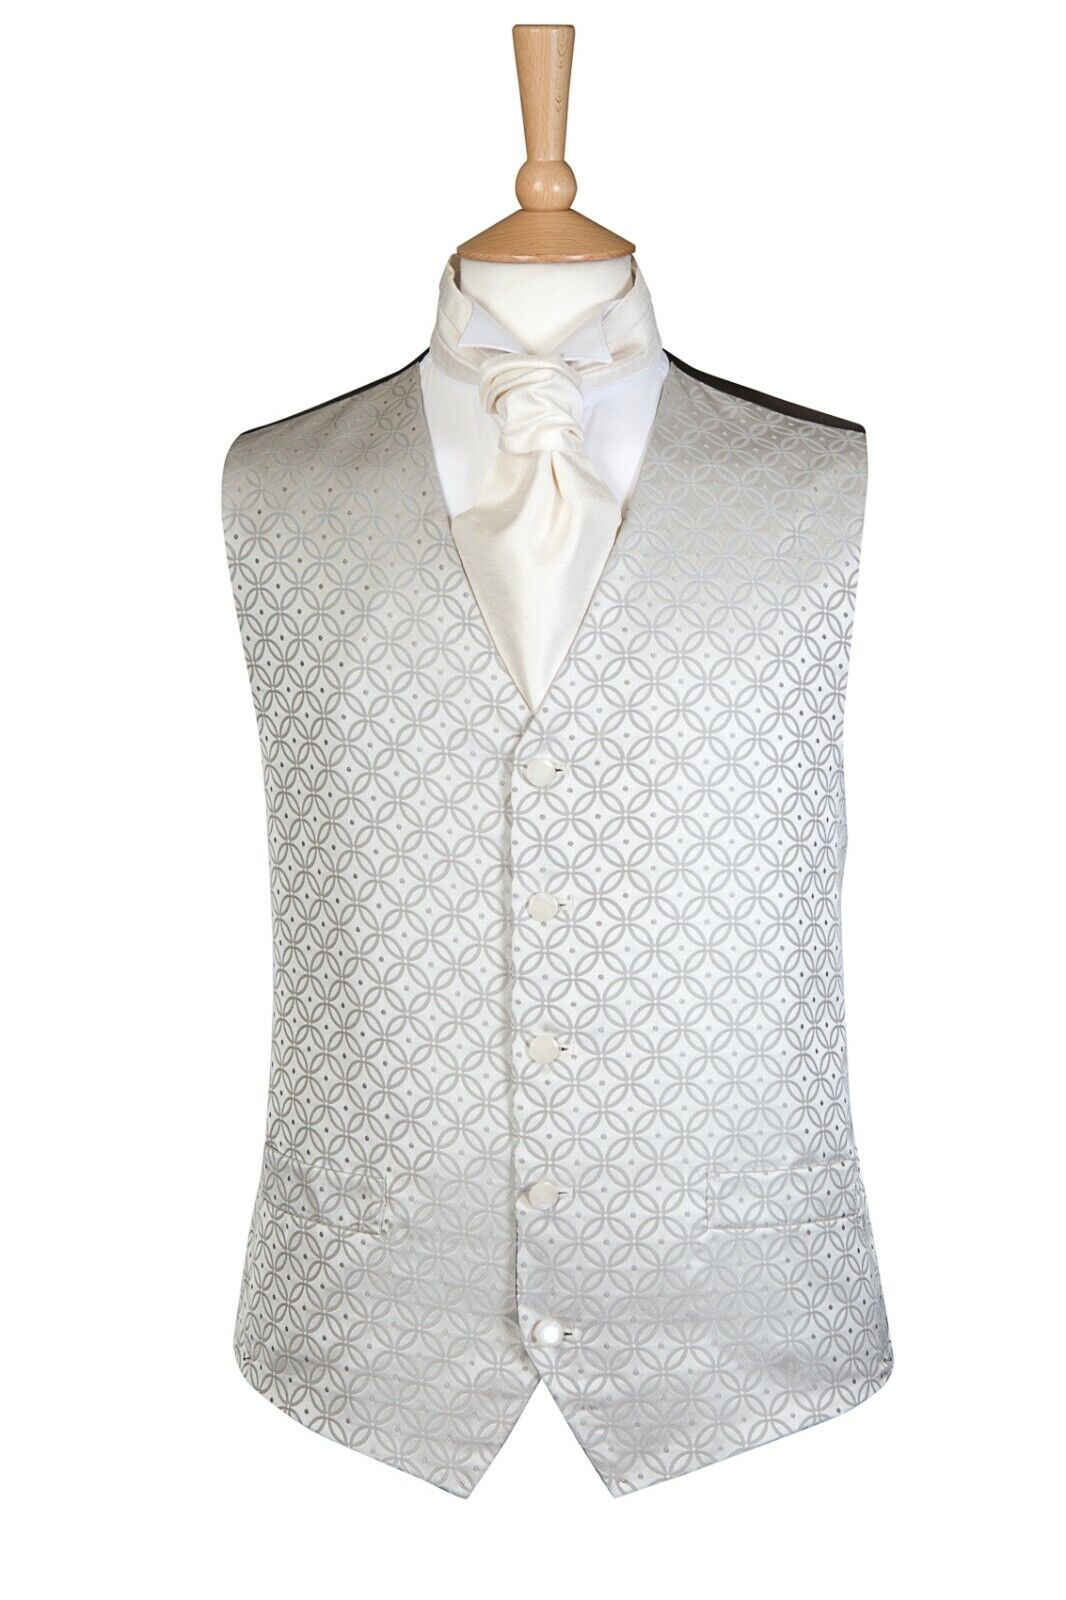 waistcoat SILVER CIRCLE Raleigh Mall Max 65% OFF CHEST SIZE £2 ONLY FROM 38